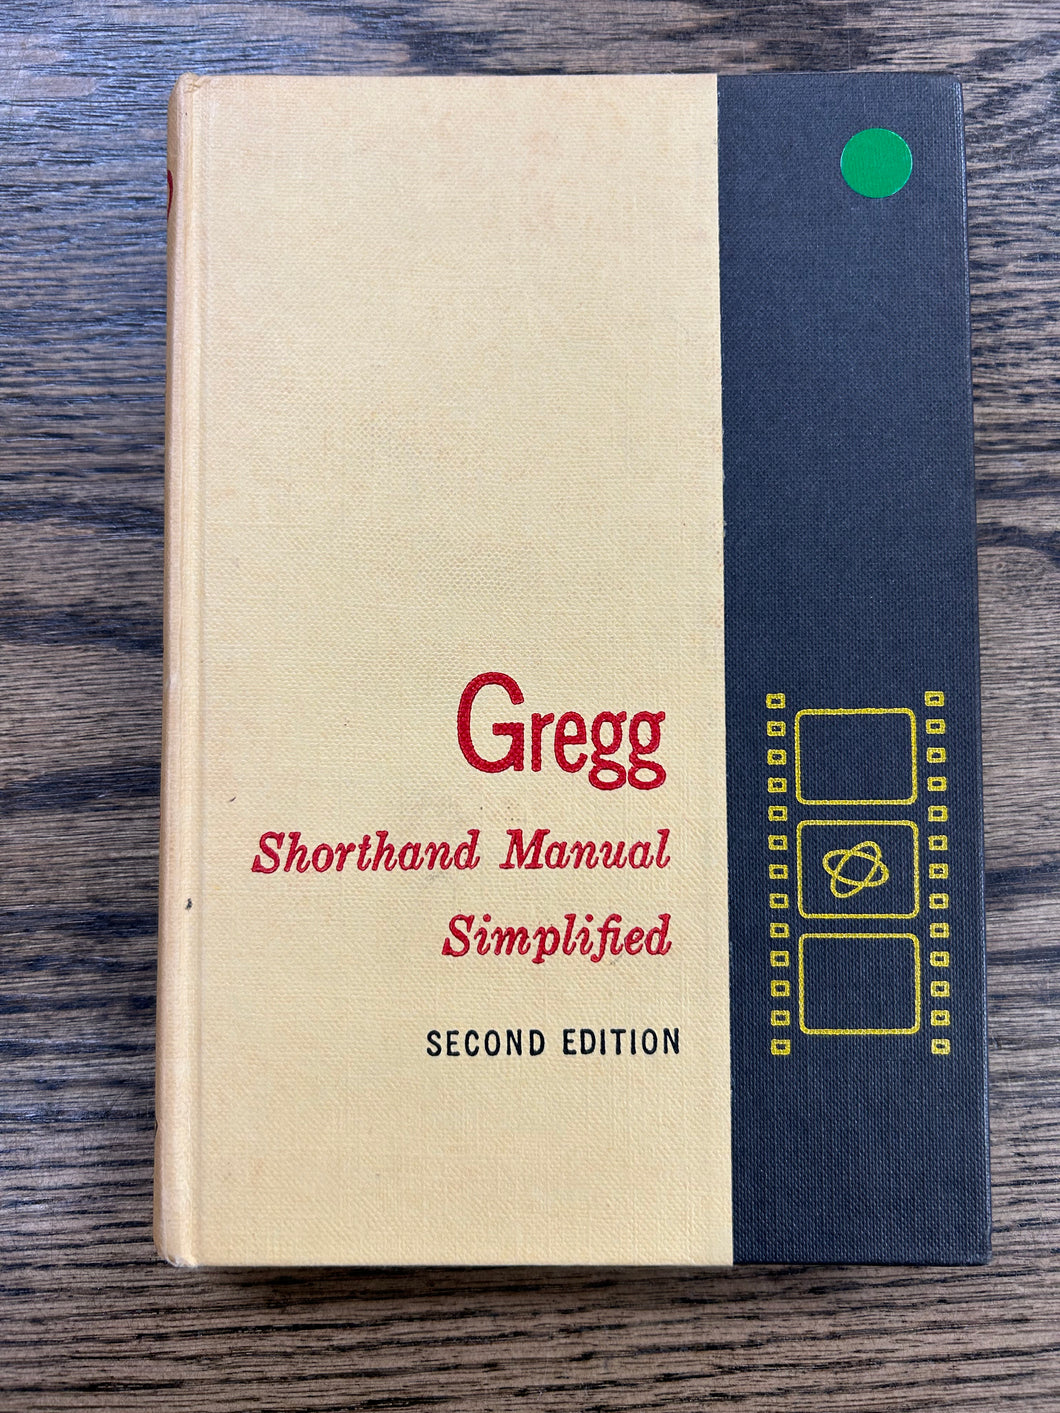 Gregg Shorthand Manual Simplified Second Edition